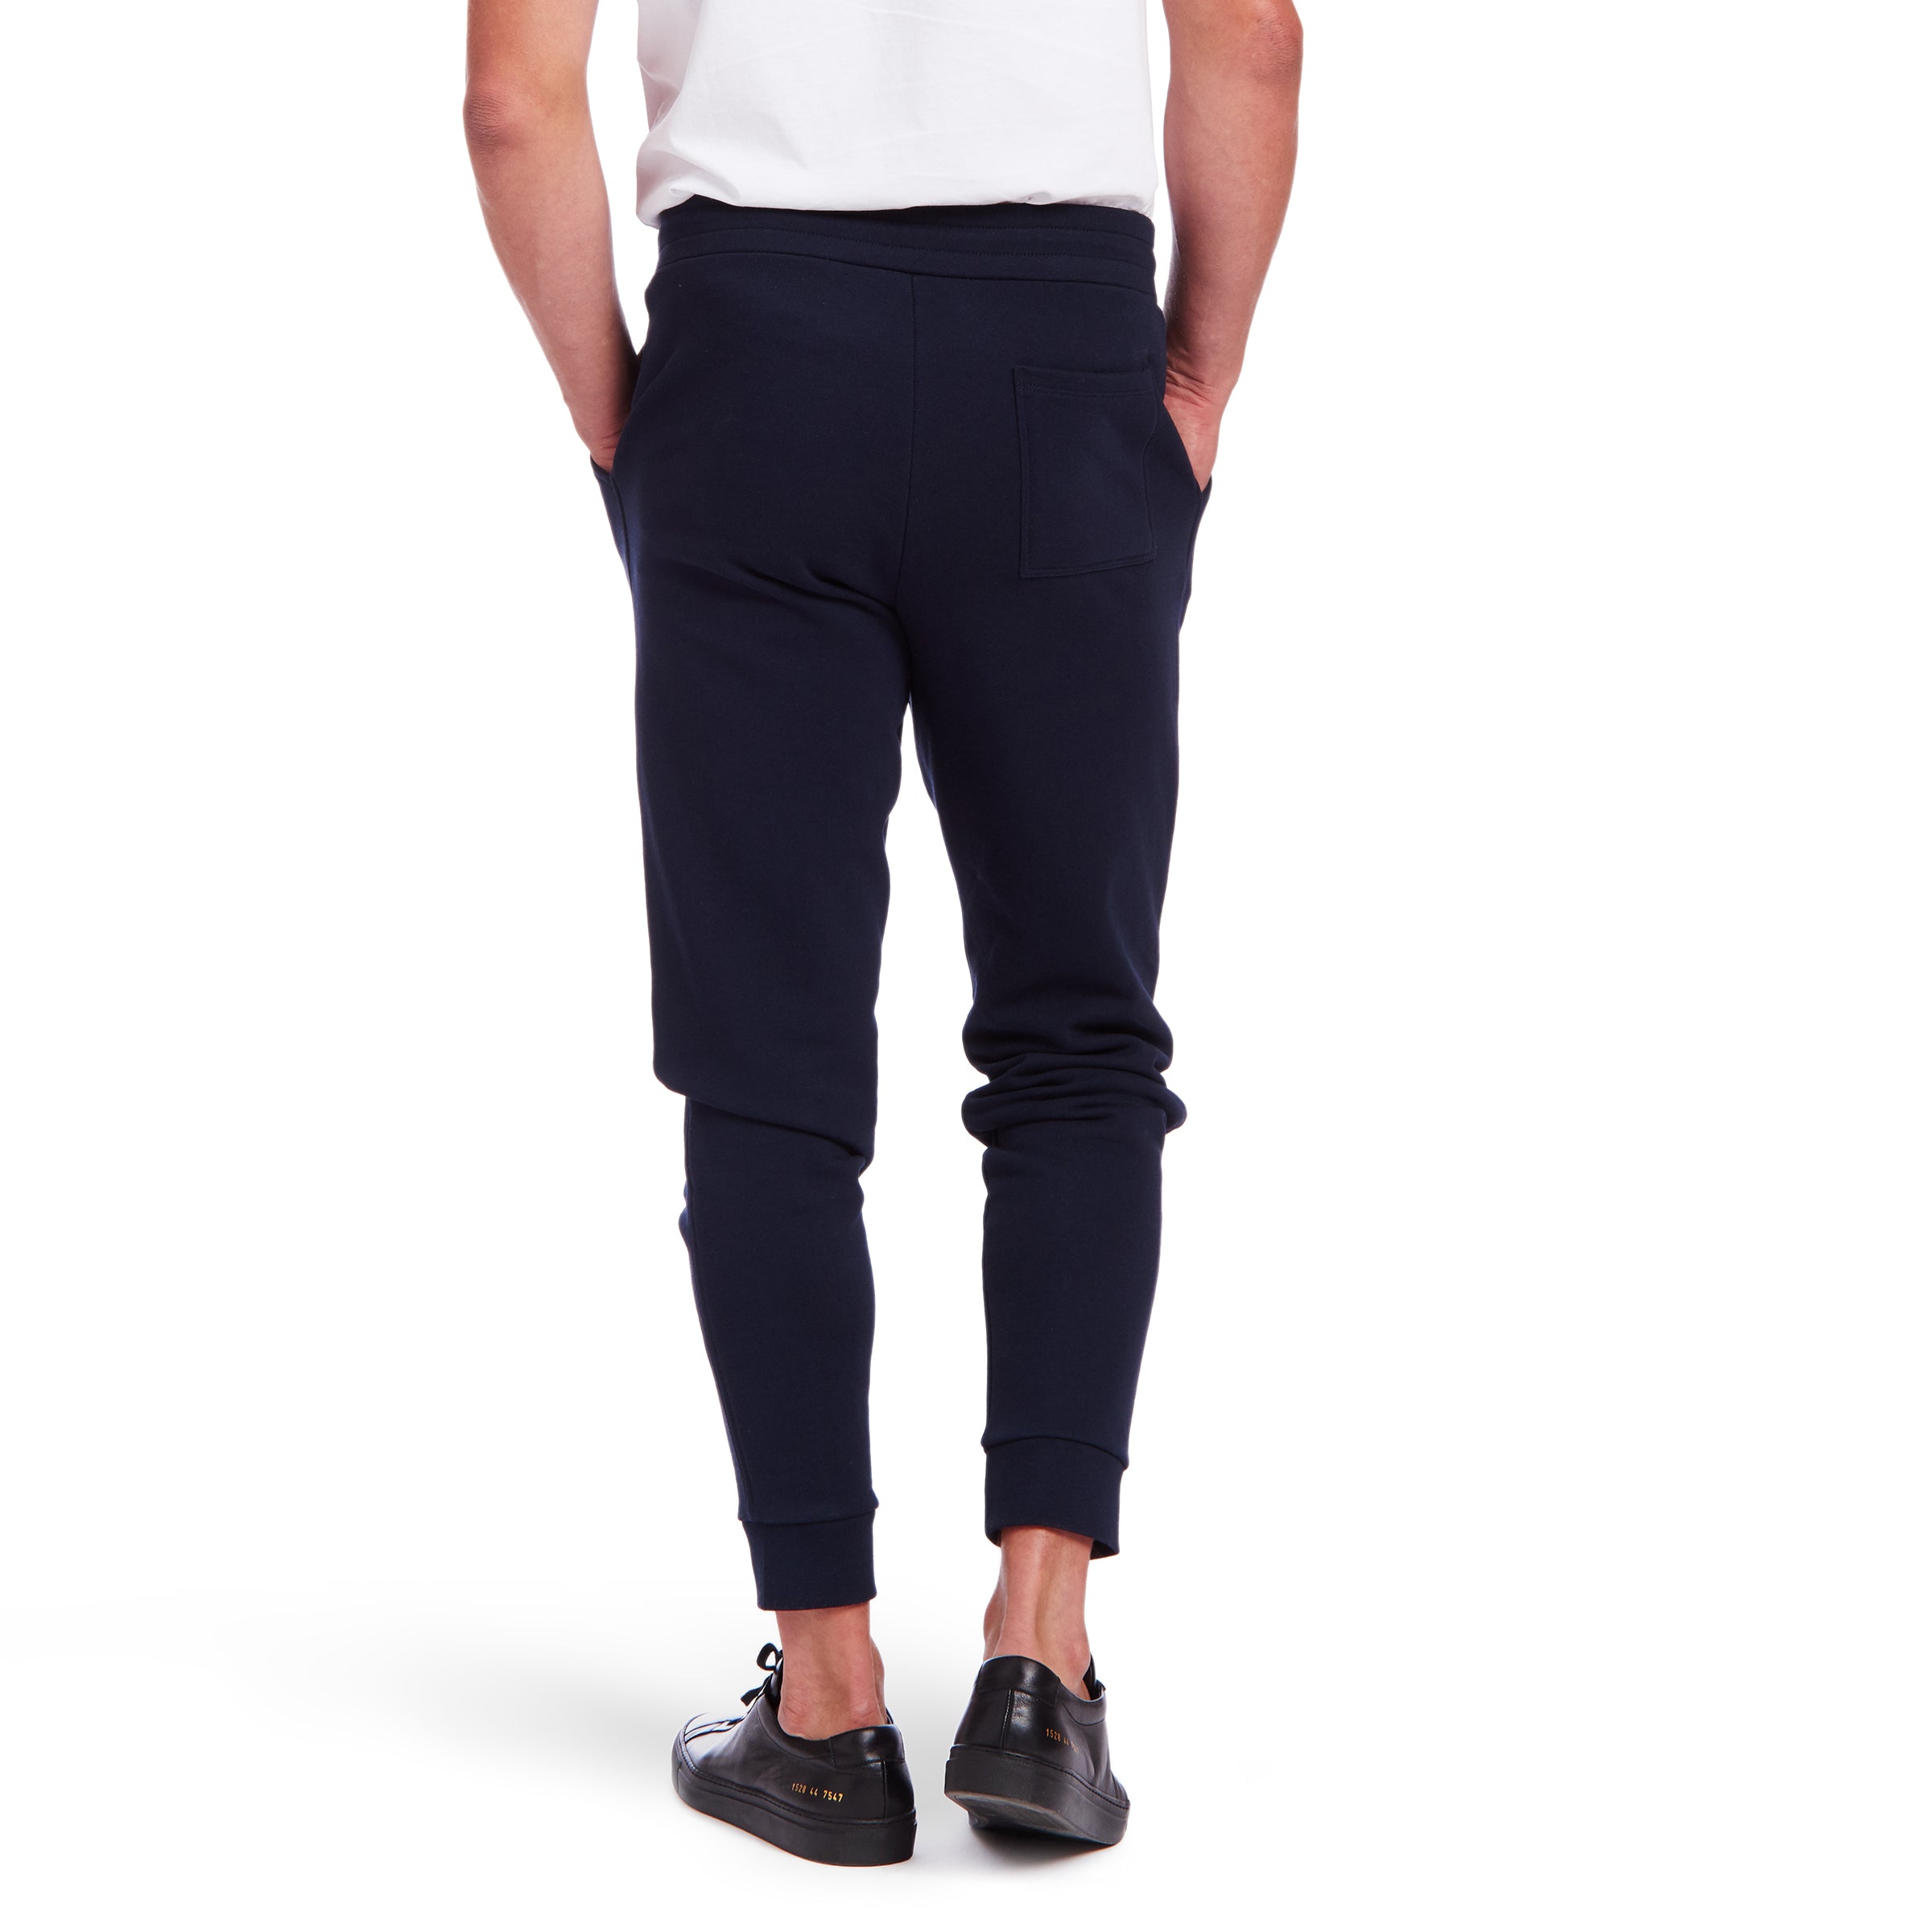 Men wearing Navy The French Terry Sweatpant Hooper